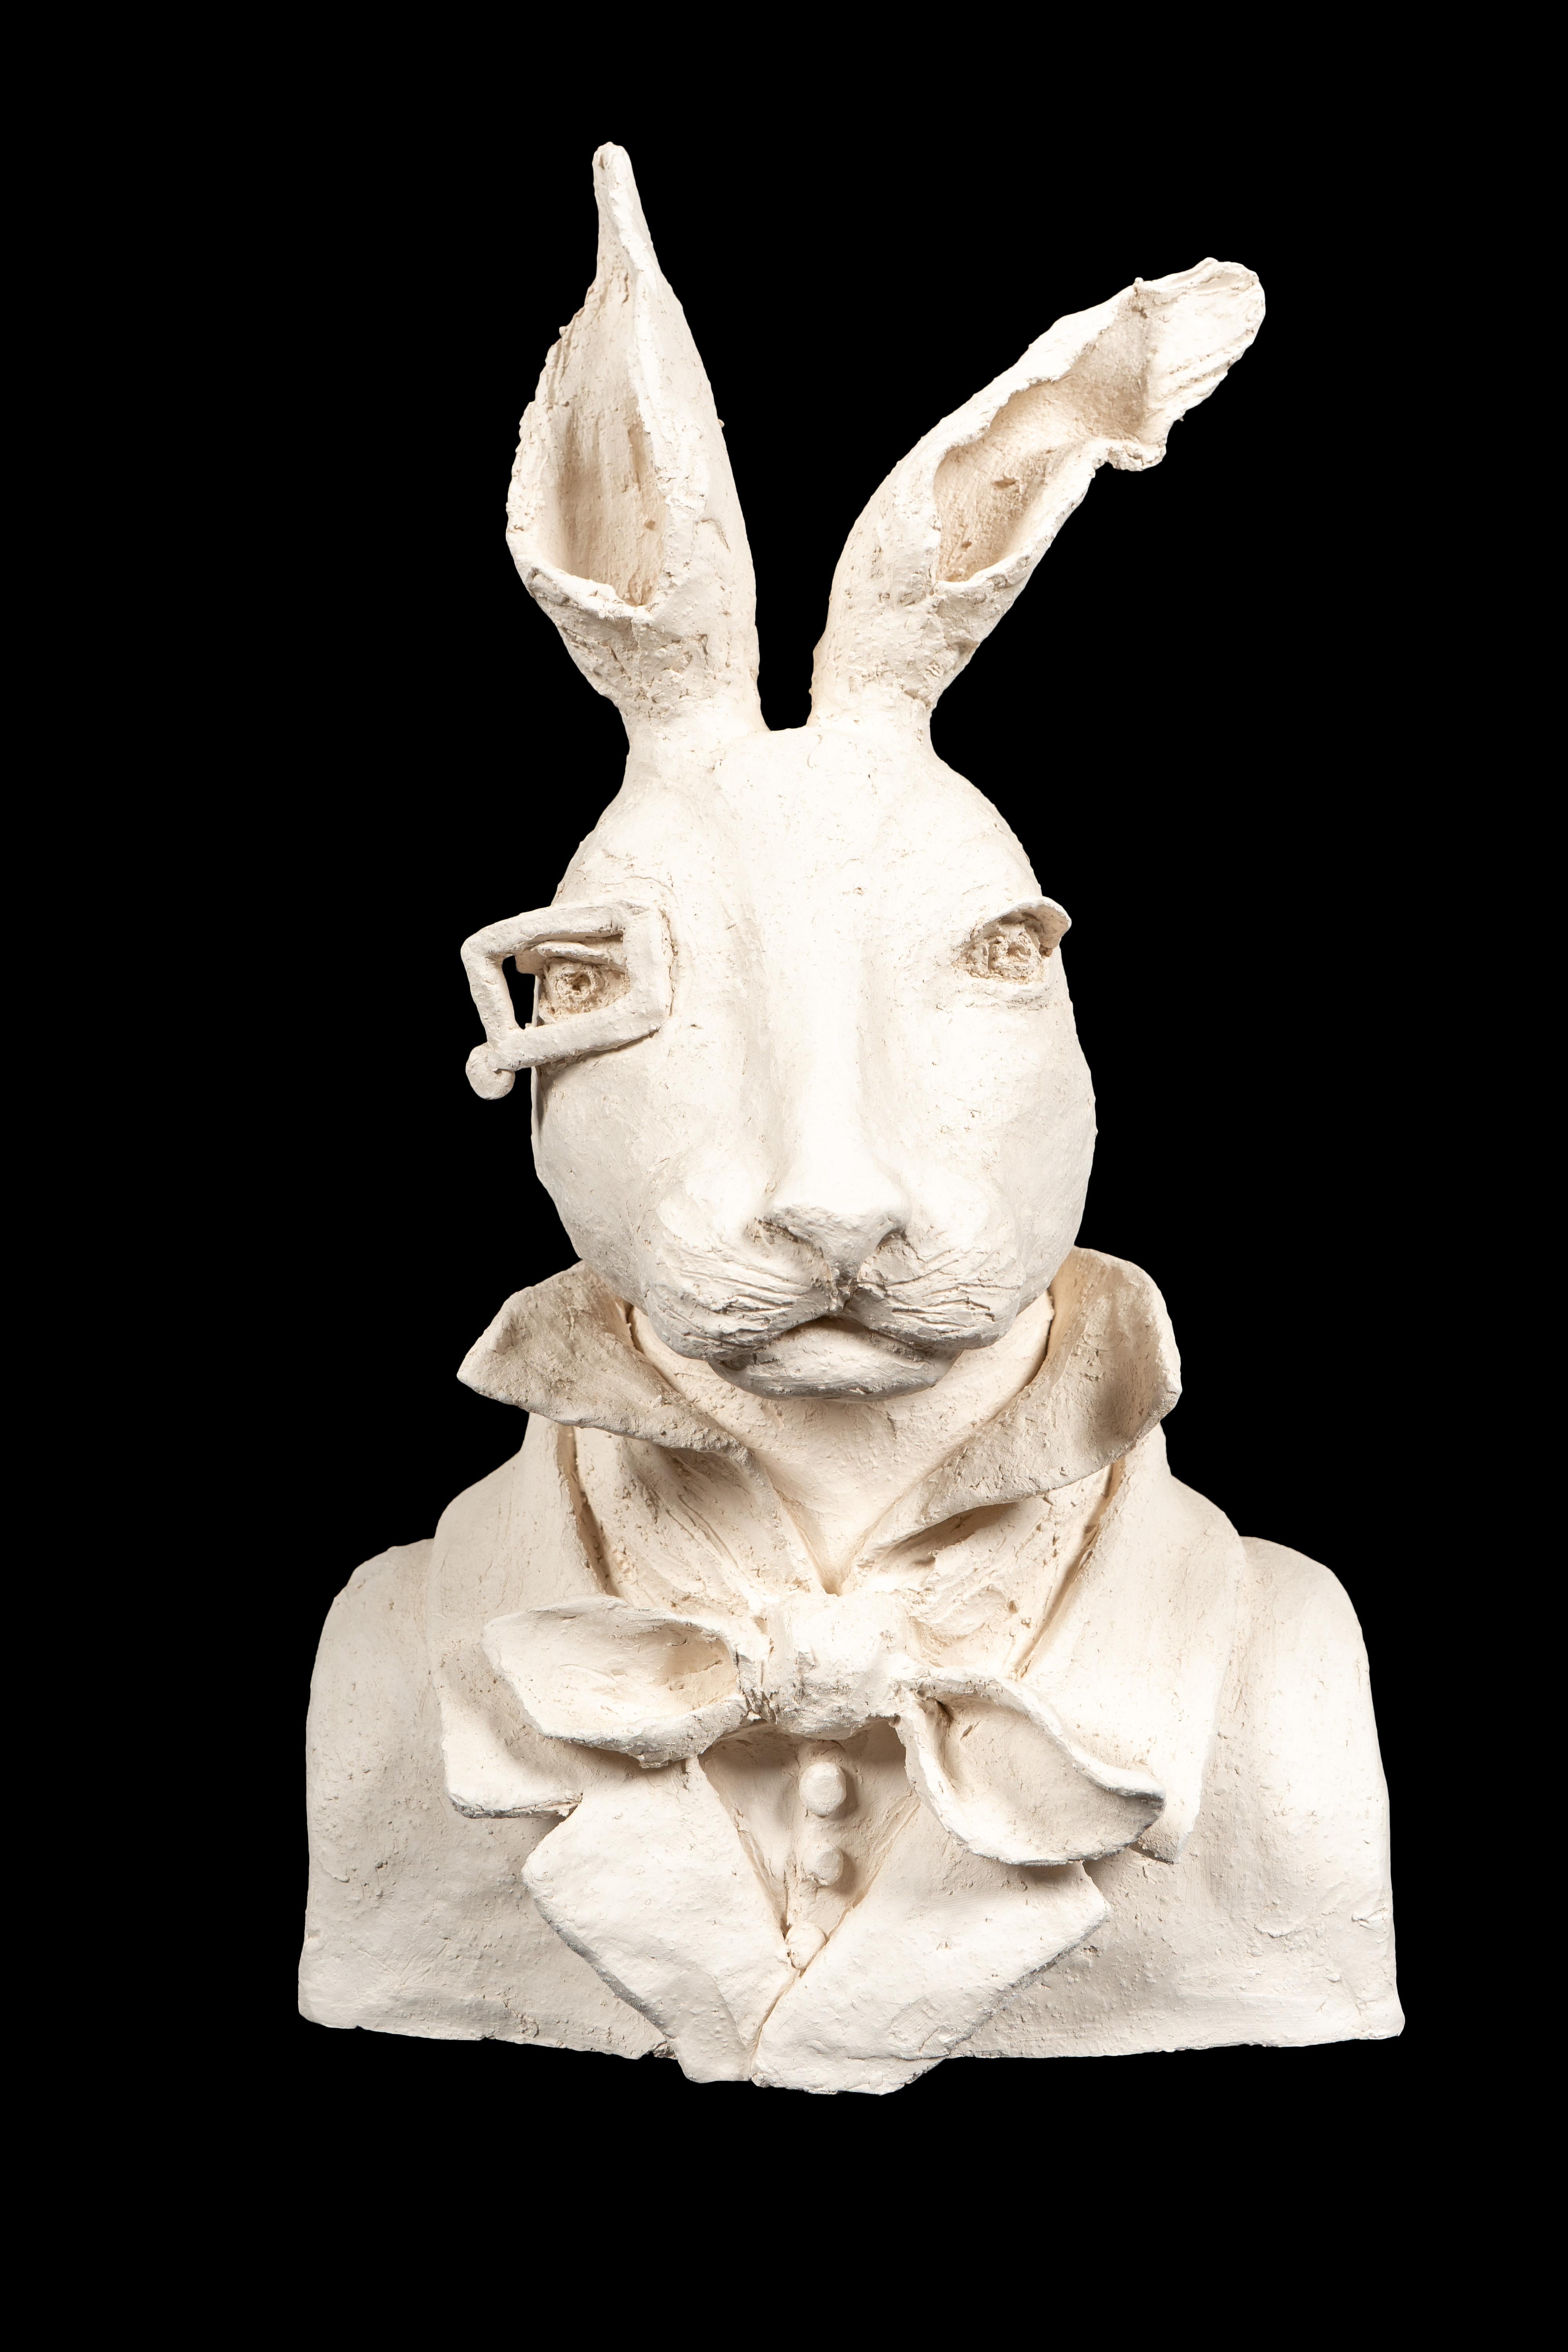 Anthropomorphic Terracotta Bust of Rabbit wearing a Monocle. A charming one-of-a-kind sculpture made in France. 16